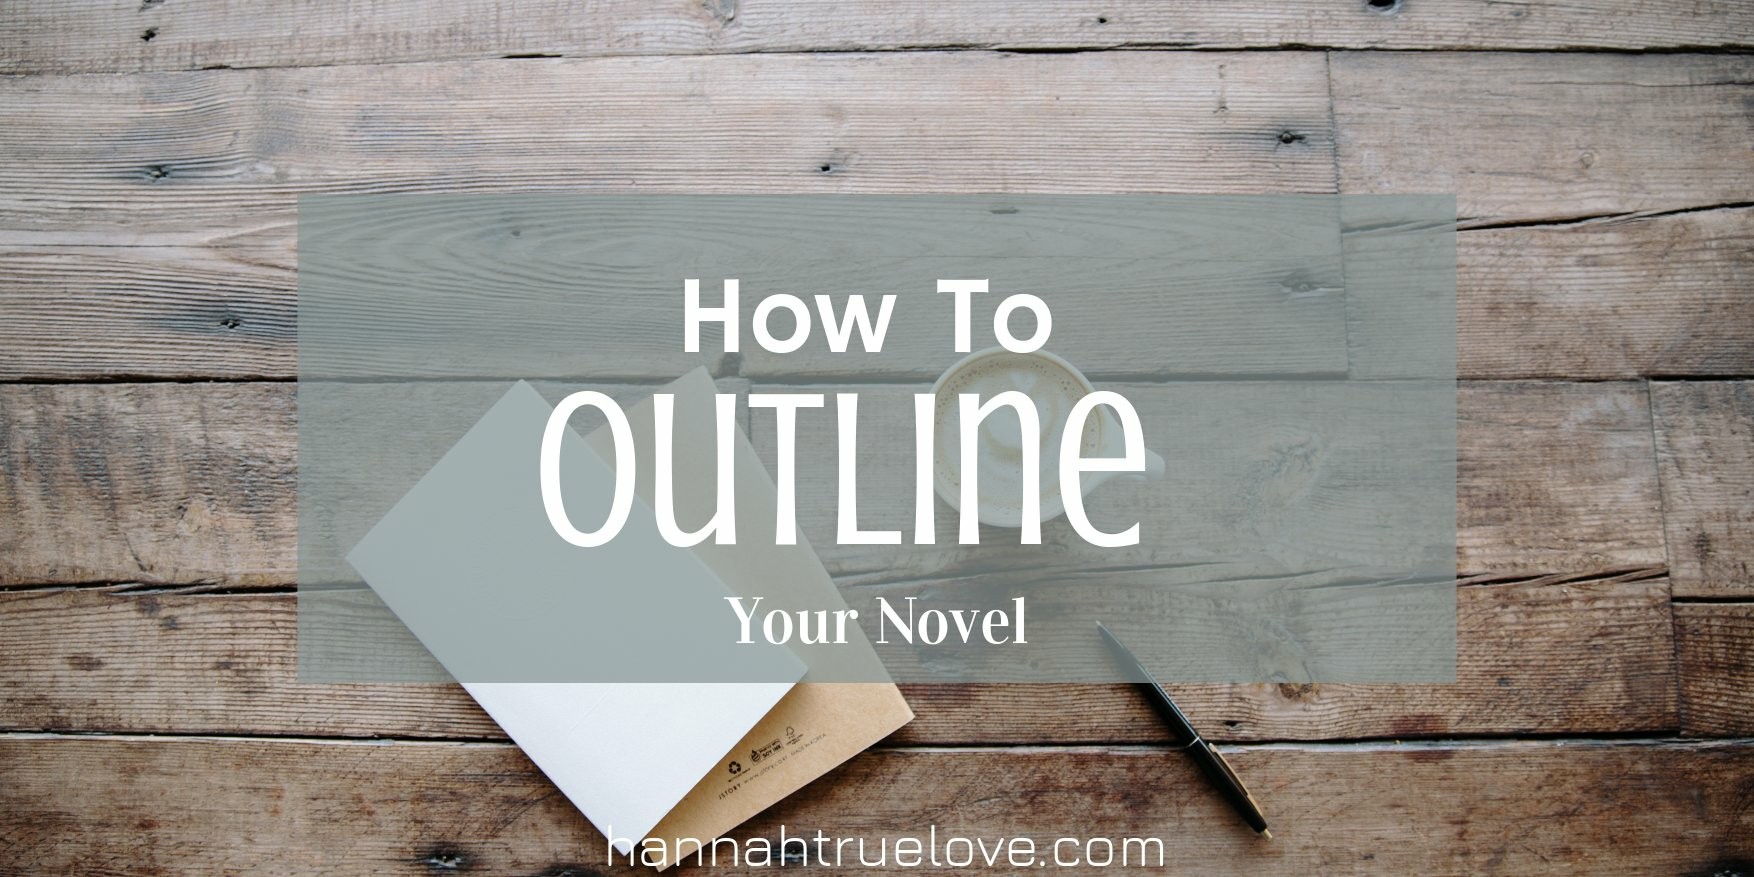 How to Outline your novel